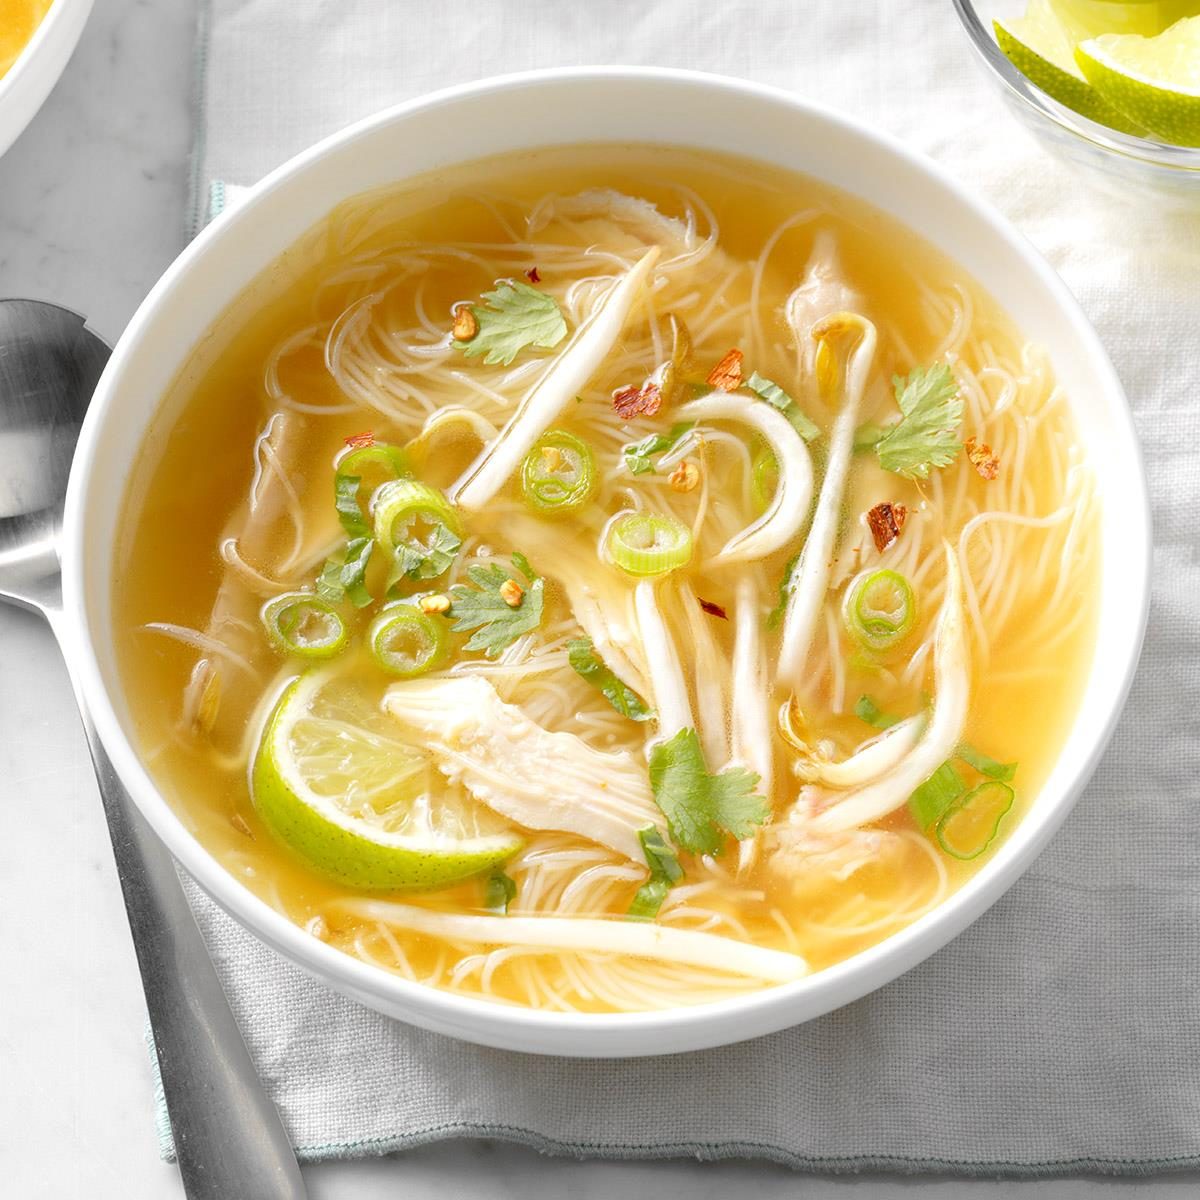 Thai Chicken Noodle Soup Recipe: How to Make It